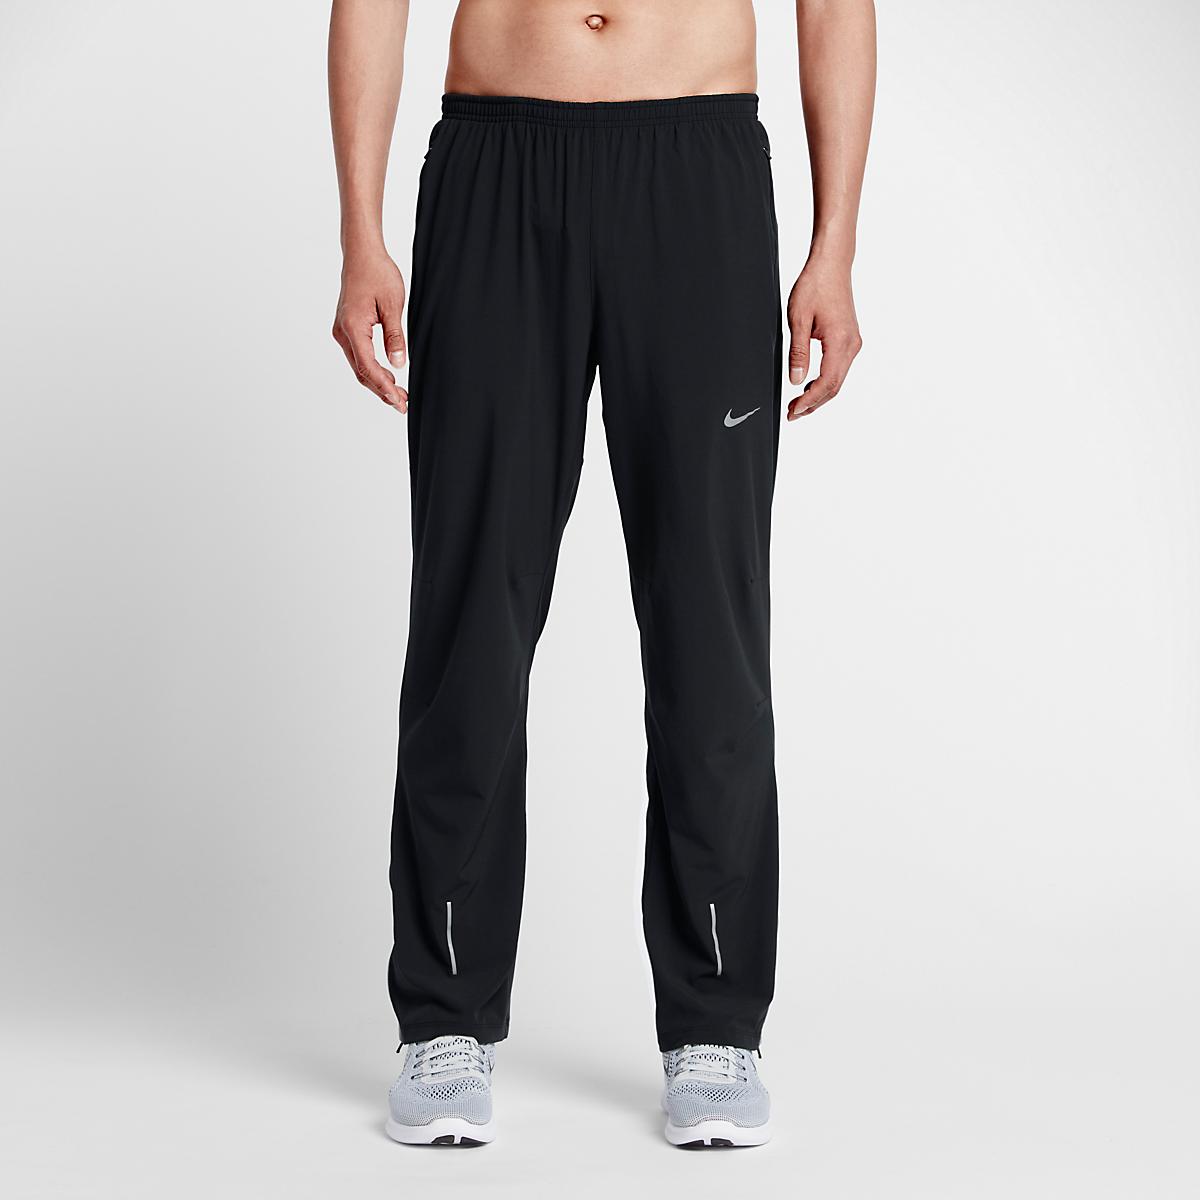 Mens Nike Dri-FIT Stretch Woven Full Length Pants at Road Runner Sports